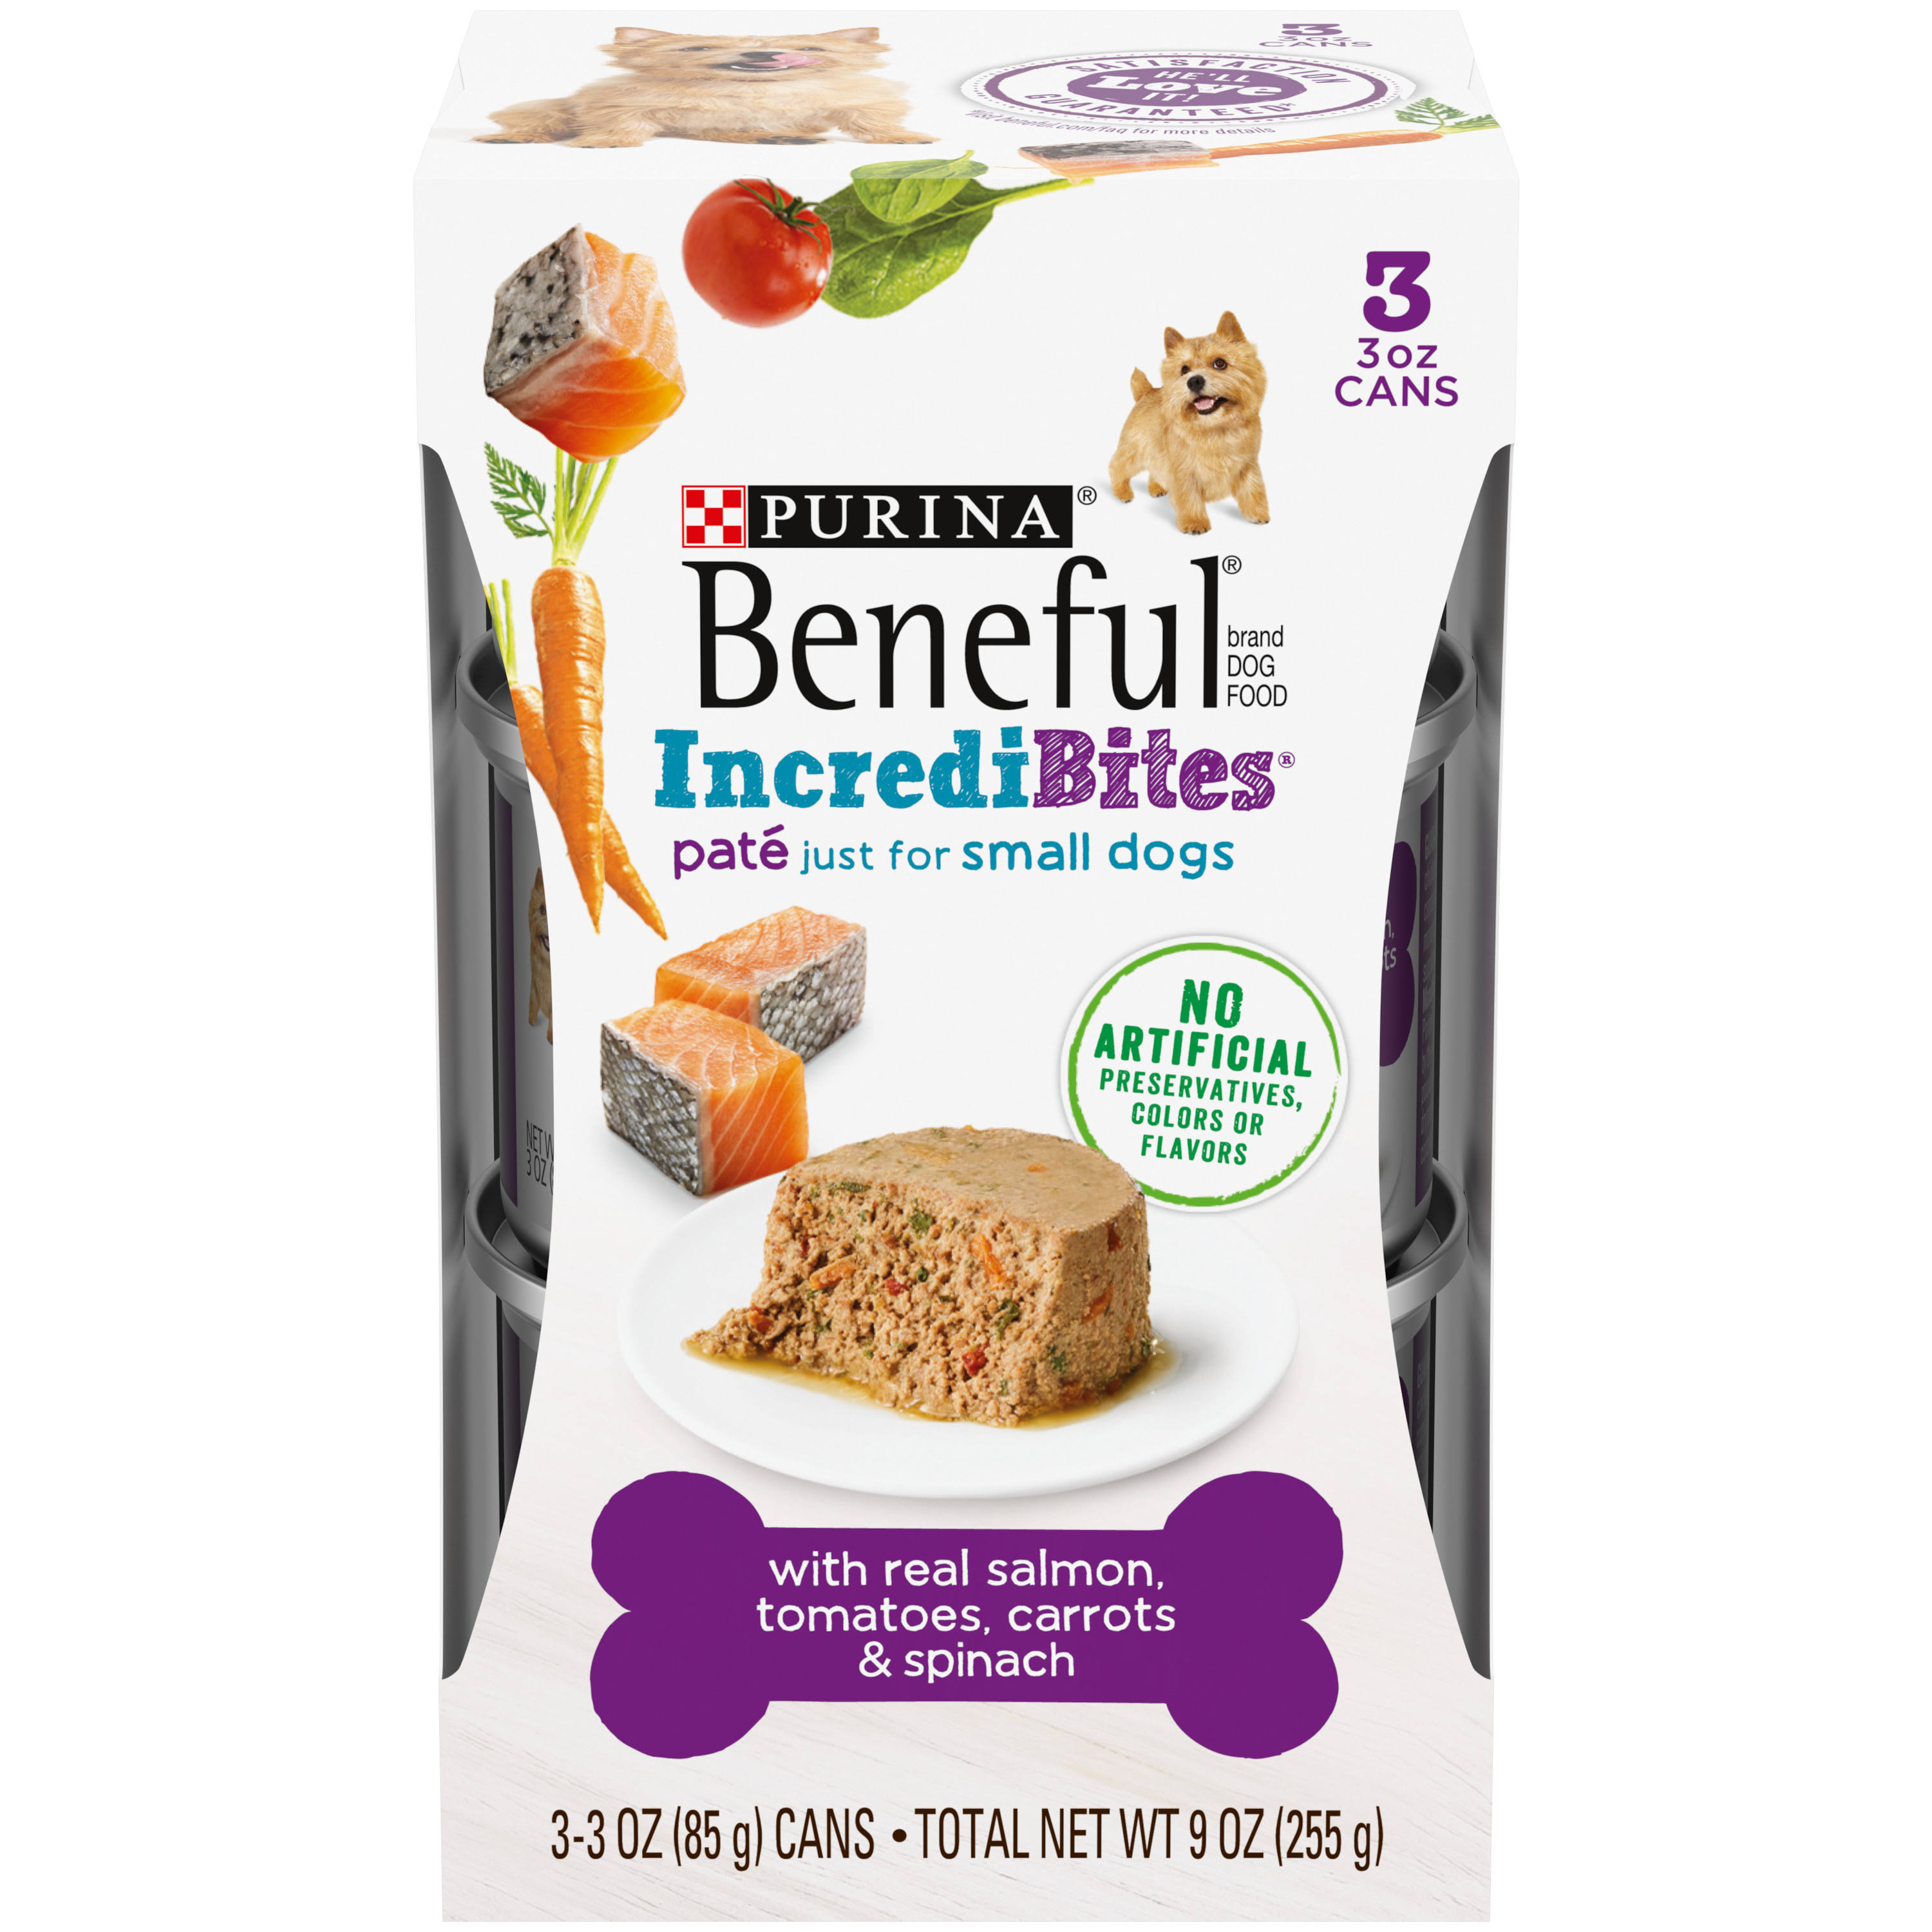 Purina Beneful Small Breed Wet Dog Food, IncrediBites Pate with Real Salmon Recipe - 3 oz